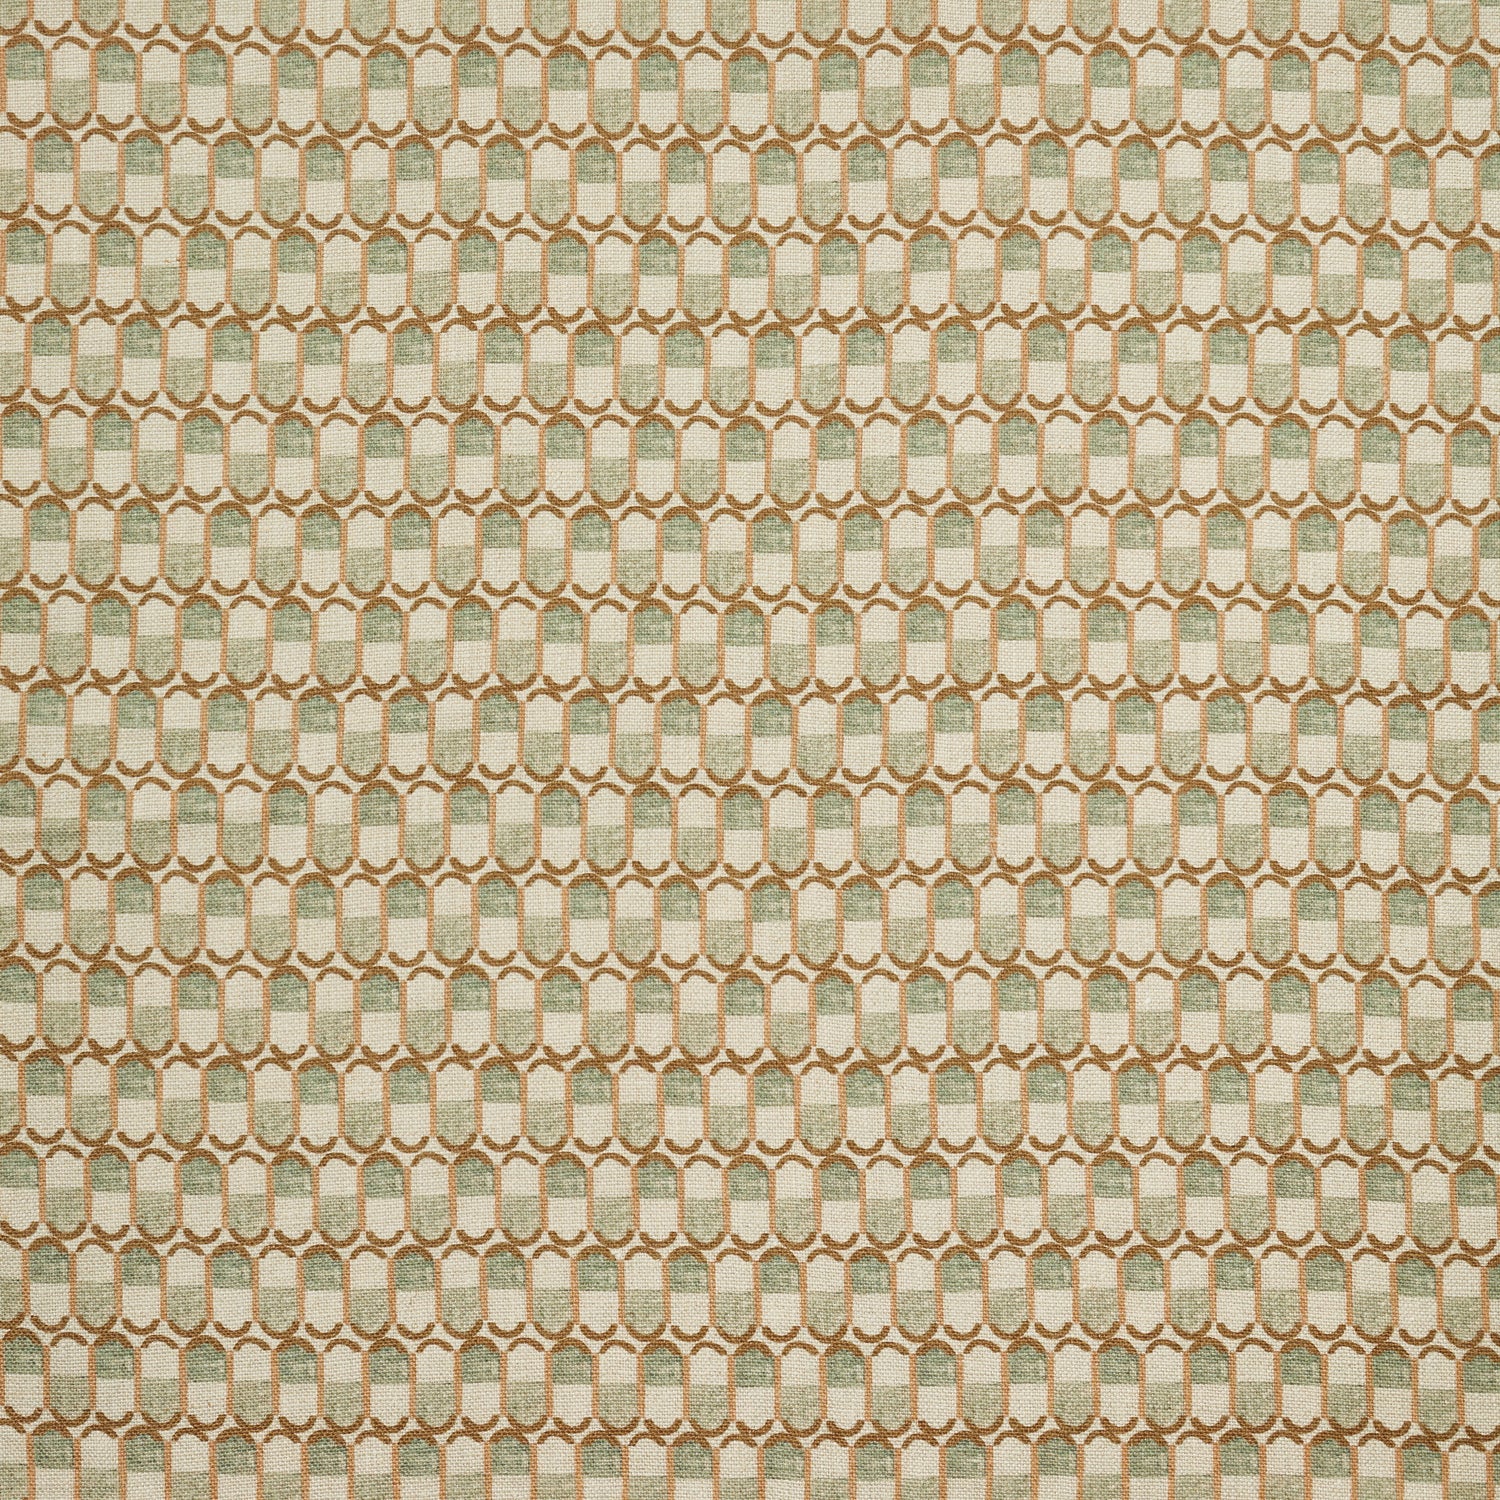 Woven fabric swatch in a repeating mosaic print in shades of brown and gray-blue on a tan field.